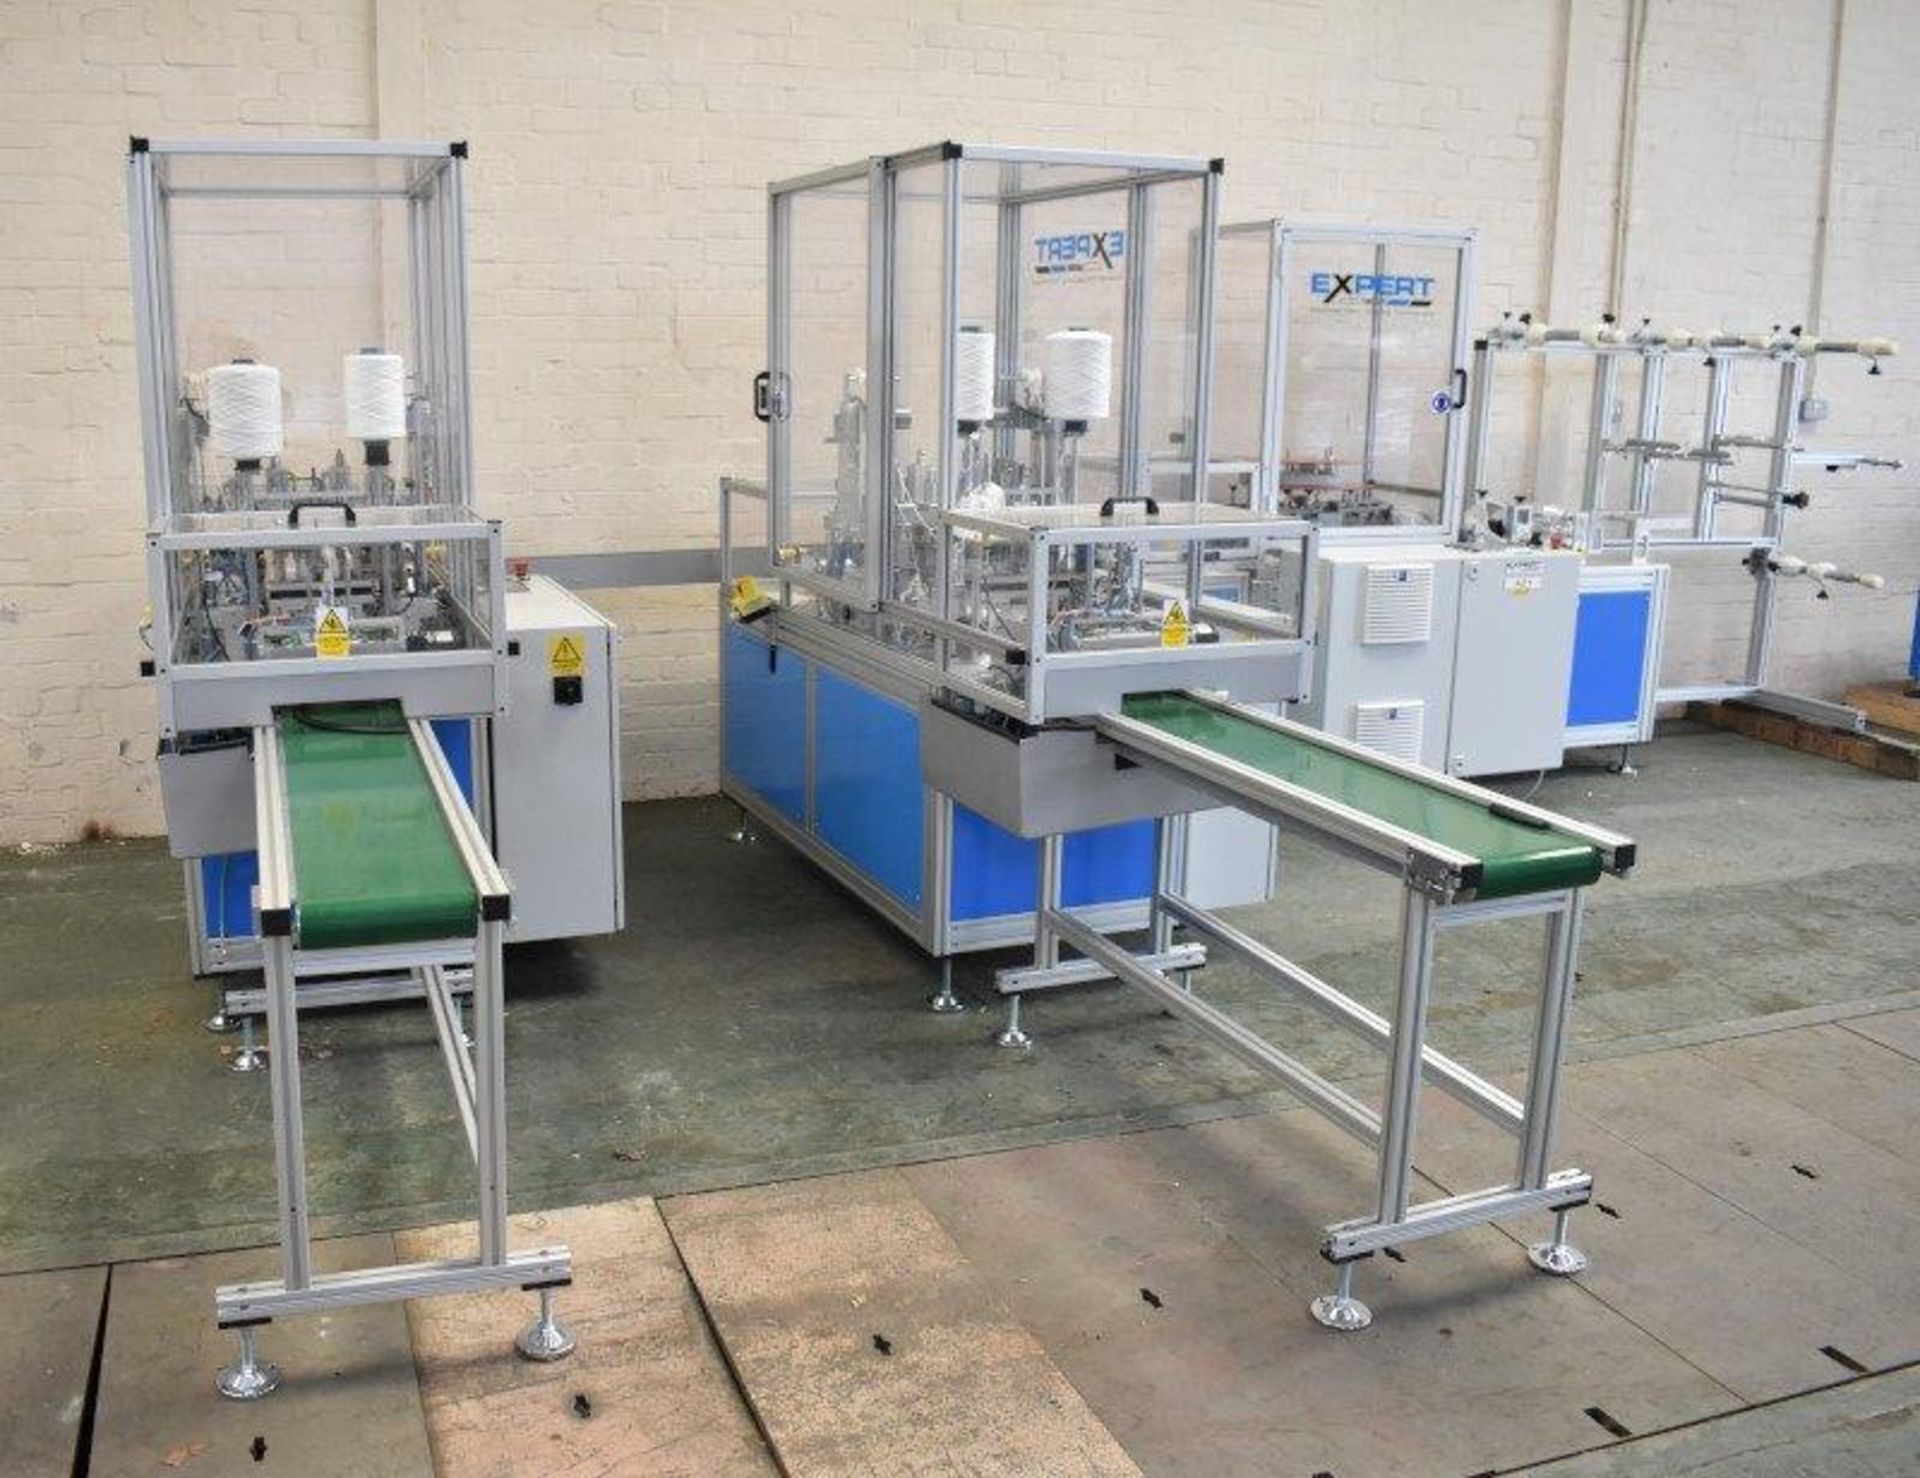 Expert fully automated Mask Making Machine including an Ilapak Smart flow wrapping packaging machine - Image 15 of 28